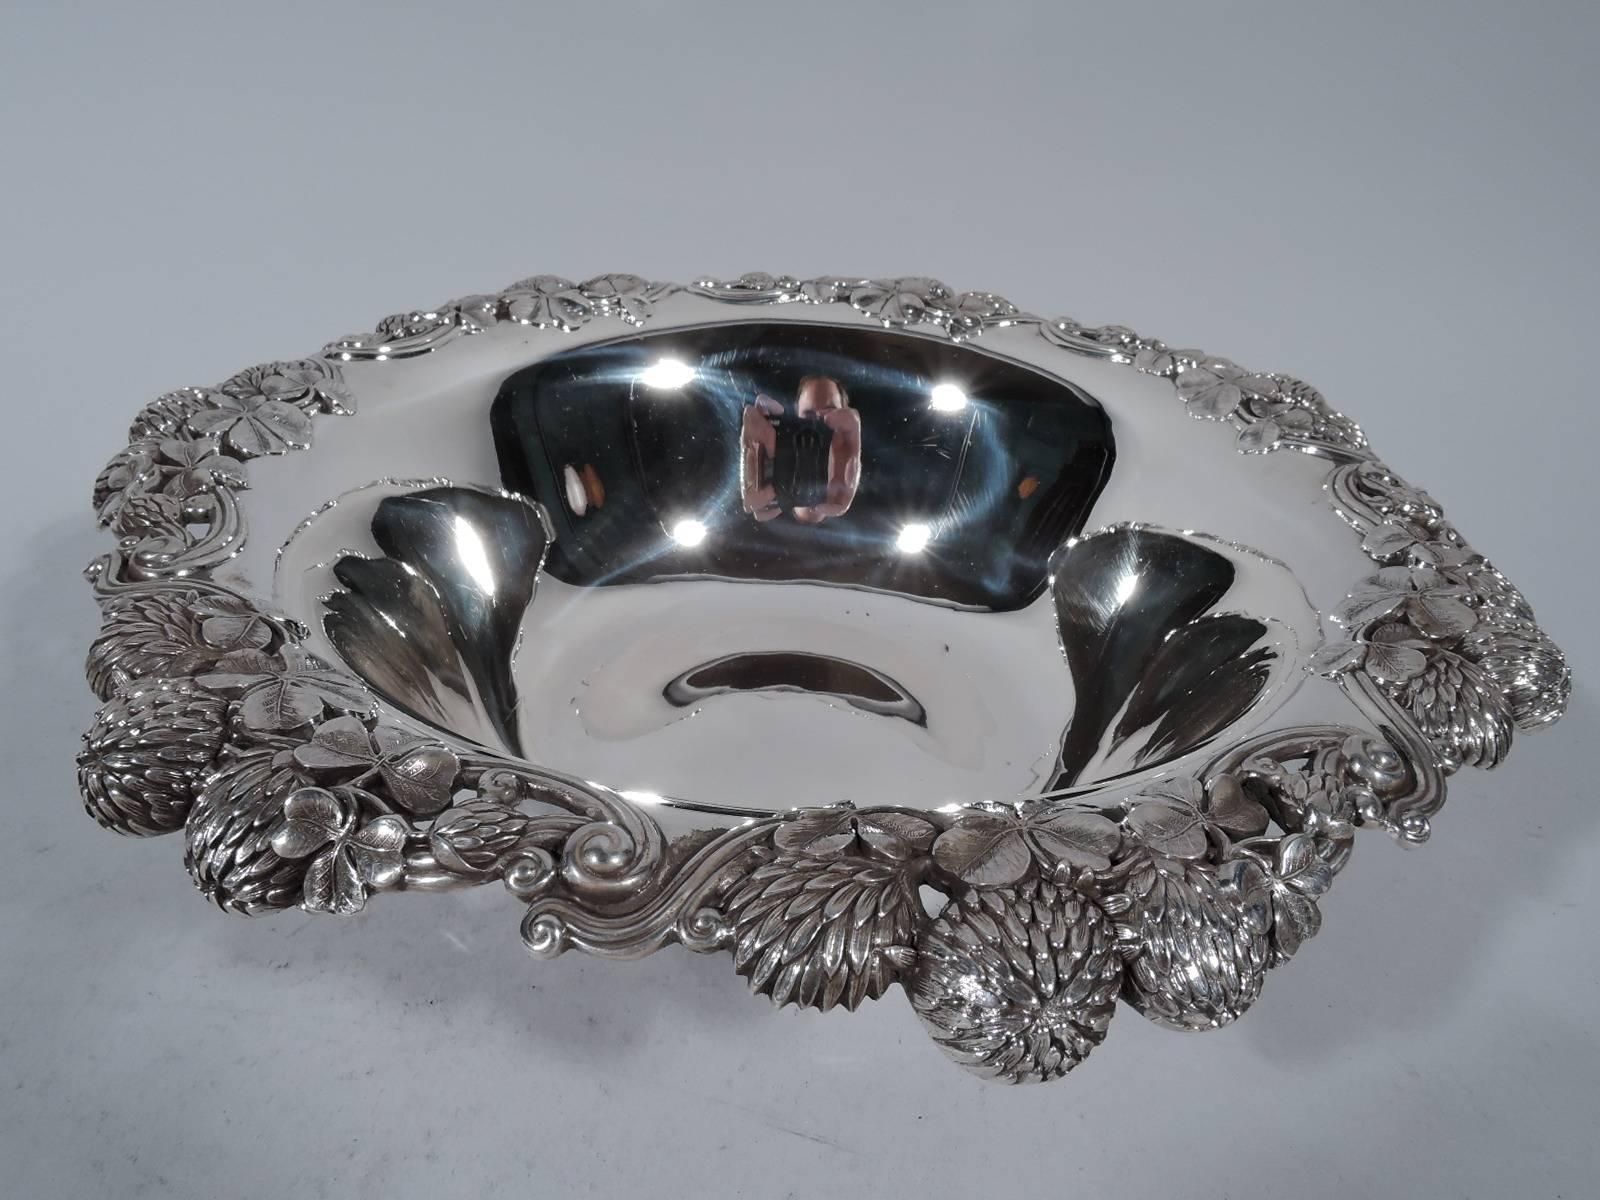 Sterling silver bowl in famed clover pattern. Made by Tiffany & Co. in New York. Tapering sides and turned-down rim with bunched blossoms. A beautiful piece in this gilded age high-low pattern that combines wild flowers and precious metal. Hallmark